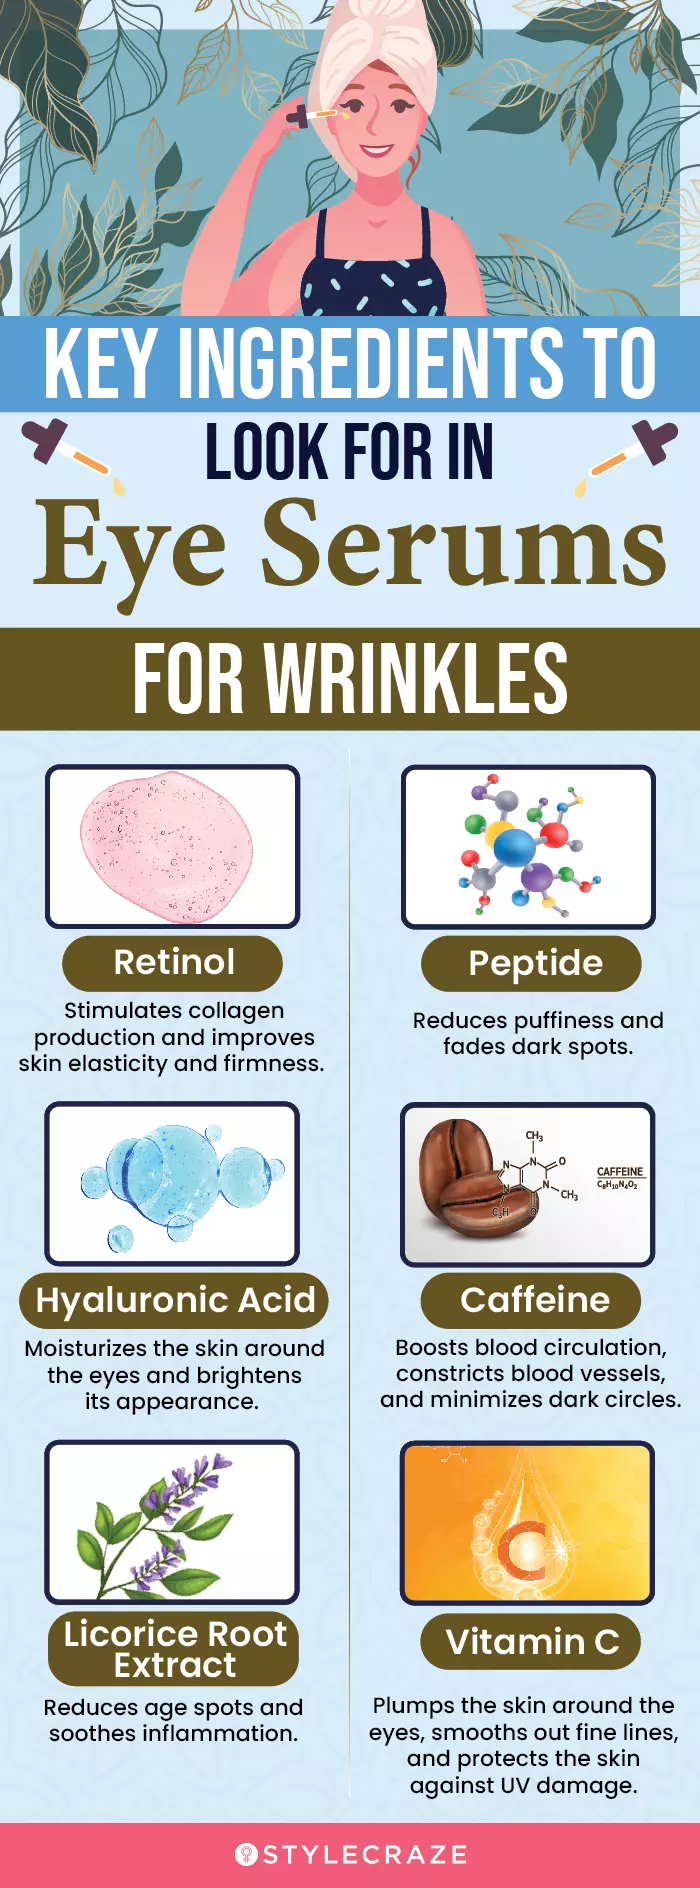 Key Ingredients To Look For In Eye Serums For Wrinkles (infographic)